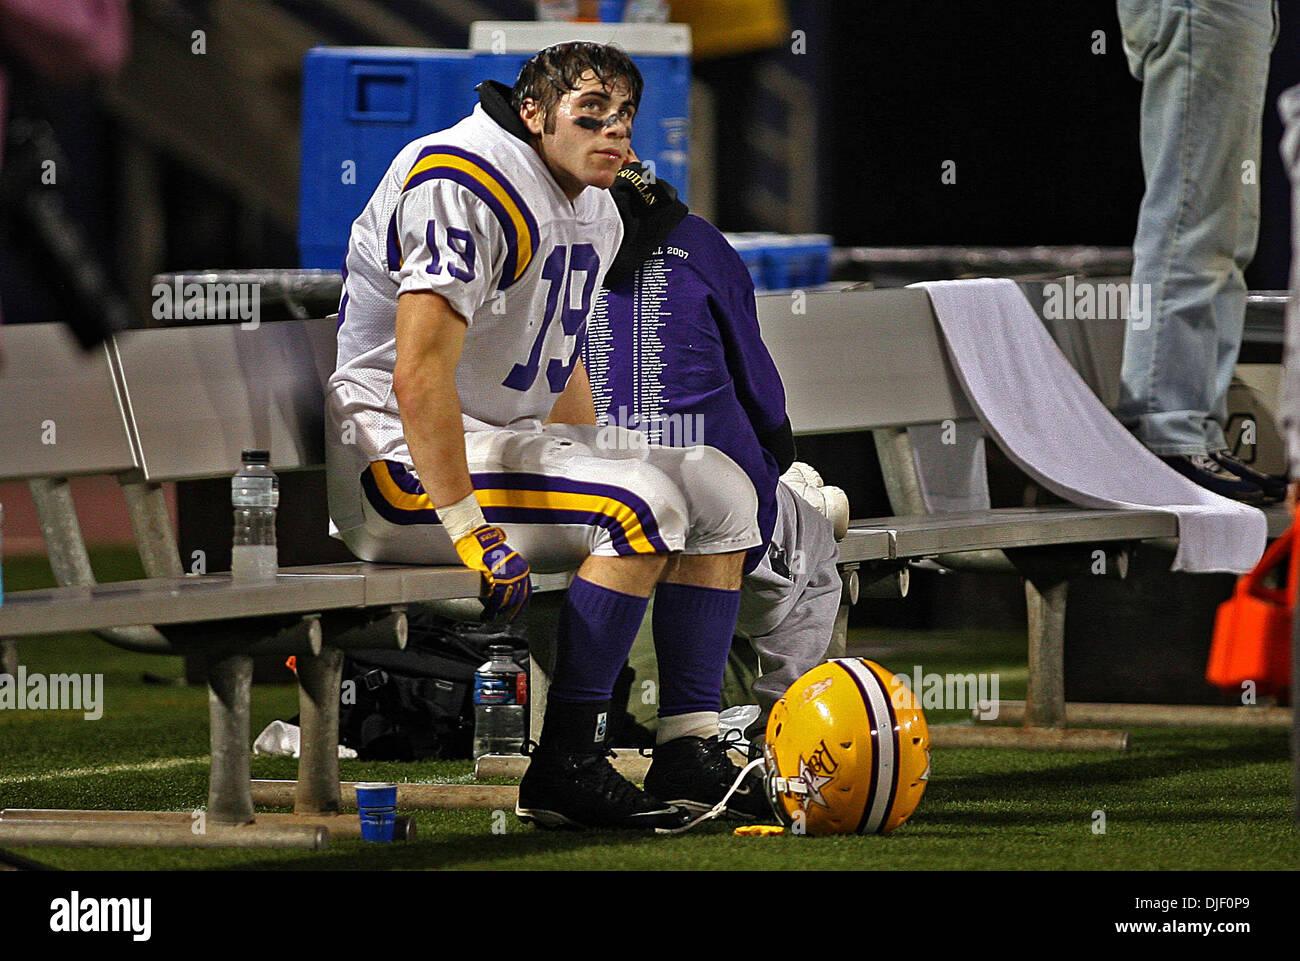 Nov 23, 2007 - Minneapolis, Minnesota, USA - Cretin-Derham Hall linebacker HARRY PITERA looked toward the scoreboard while he sat on the bench in the closing moments of the Class 5A Championship game at the 2007 Minnesota State High School State Football Tournament at the Metrodome Friday, November 23. Eden Prairie defeated Cretin-Derham Hall 50-21. (Credit Image: © Jim Gehrz/Minne Stock Photo